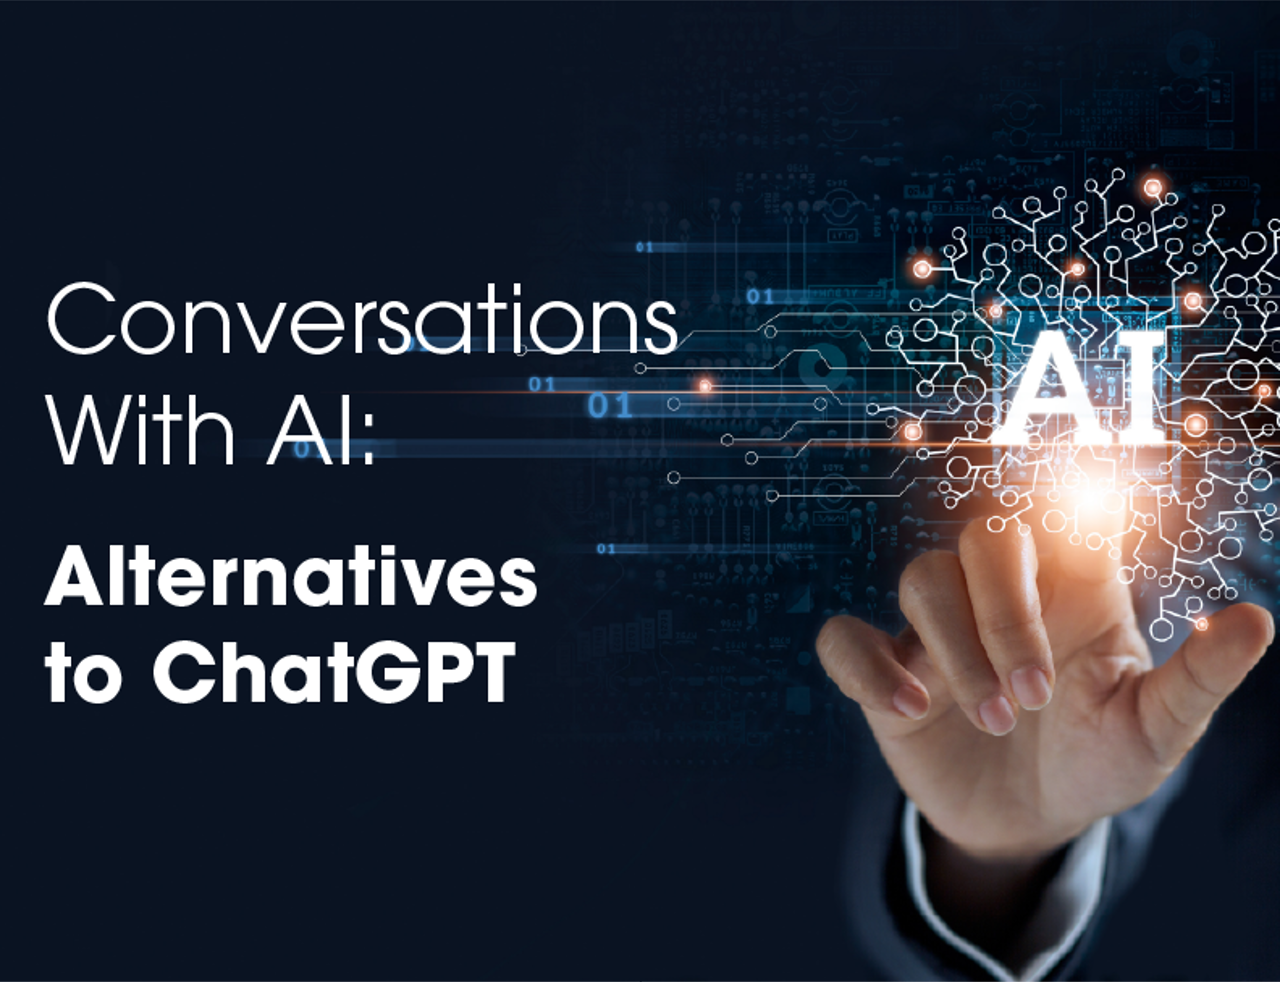 Conversations With AI: Alternatives to ChatGPT